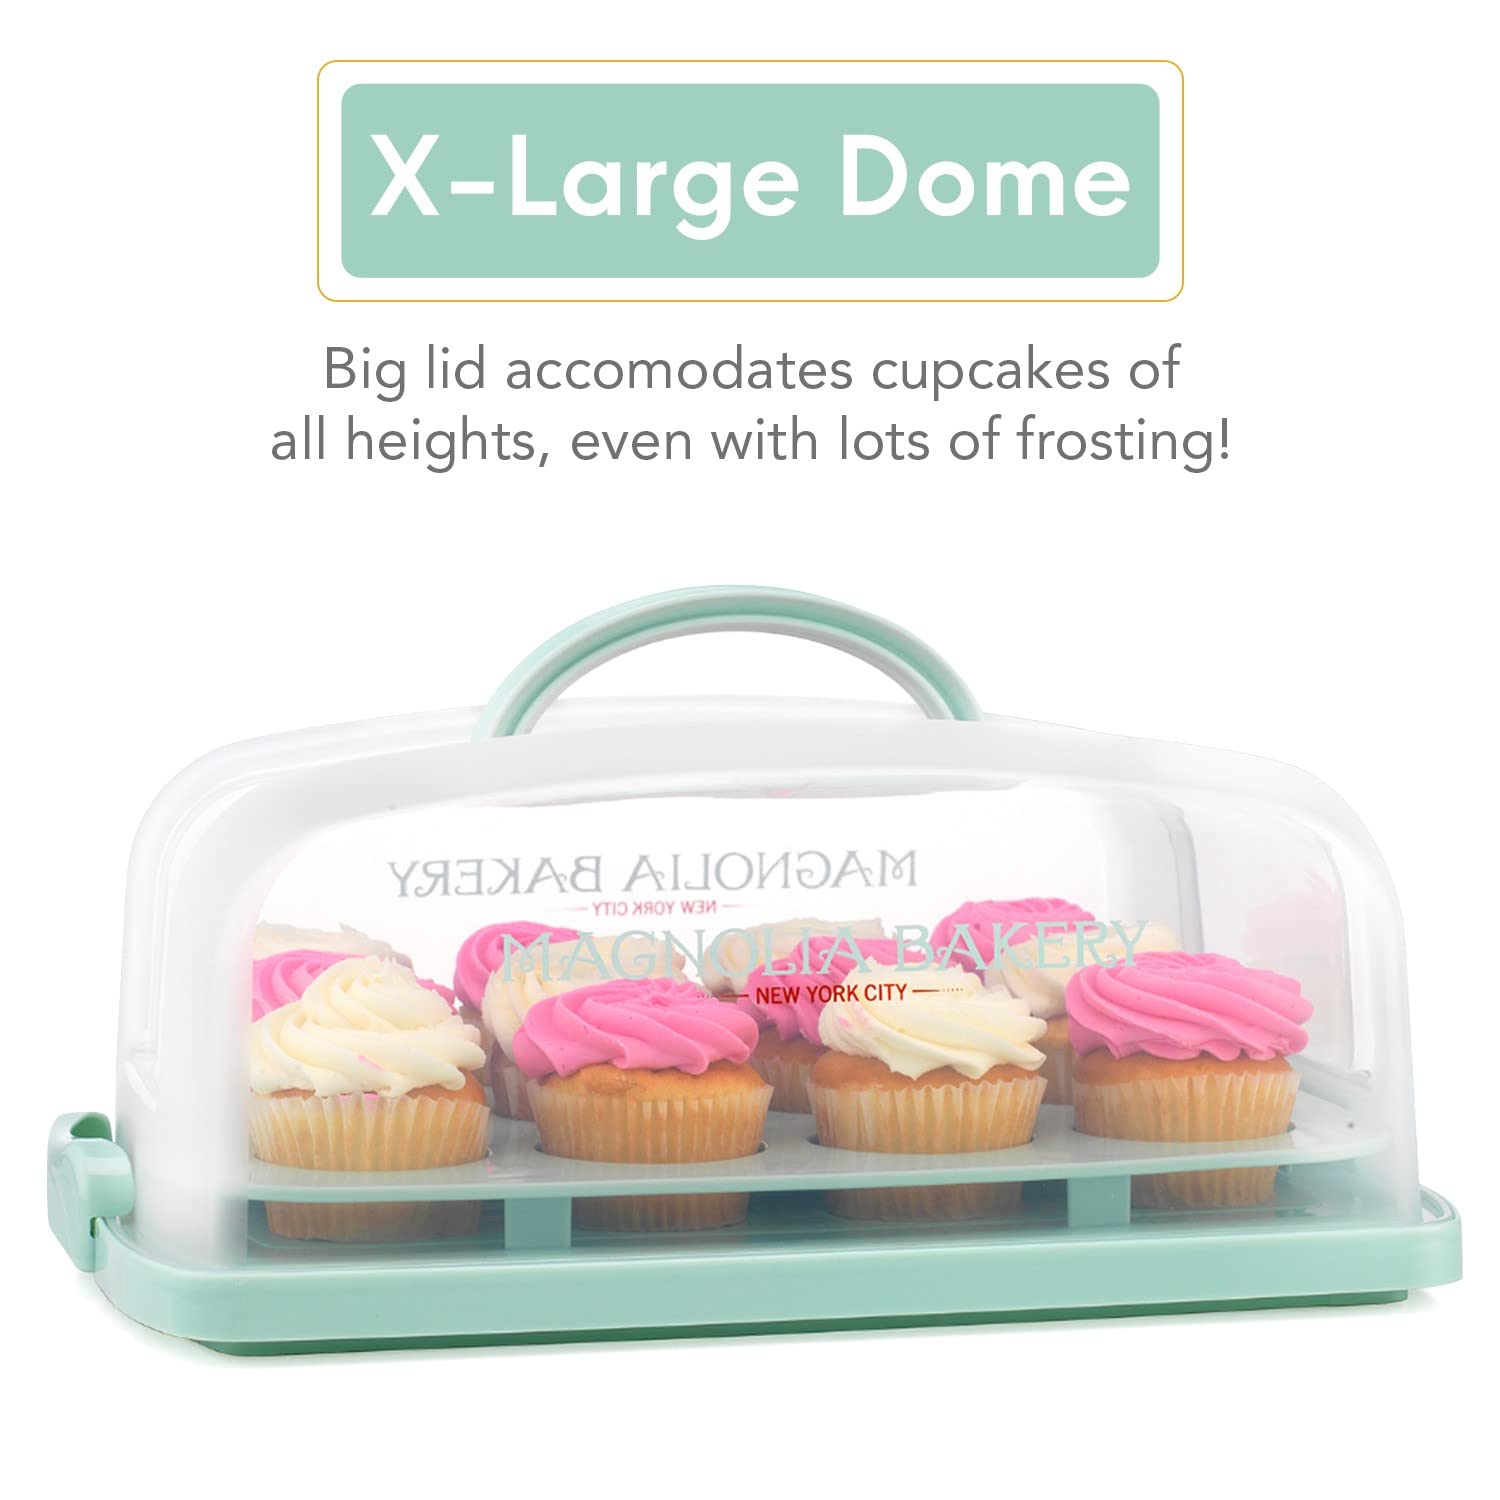 MosJos 2in1 Cupcake Carrier and Cake Keeper with Lid, Cupcake Box to Fit 12, Sturdy, BPA-Free Cupcake Holder with Two Secure Side Closures, Dishwasher Safe  - Like New